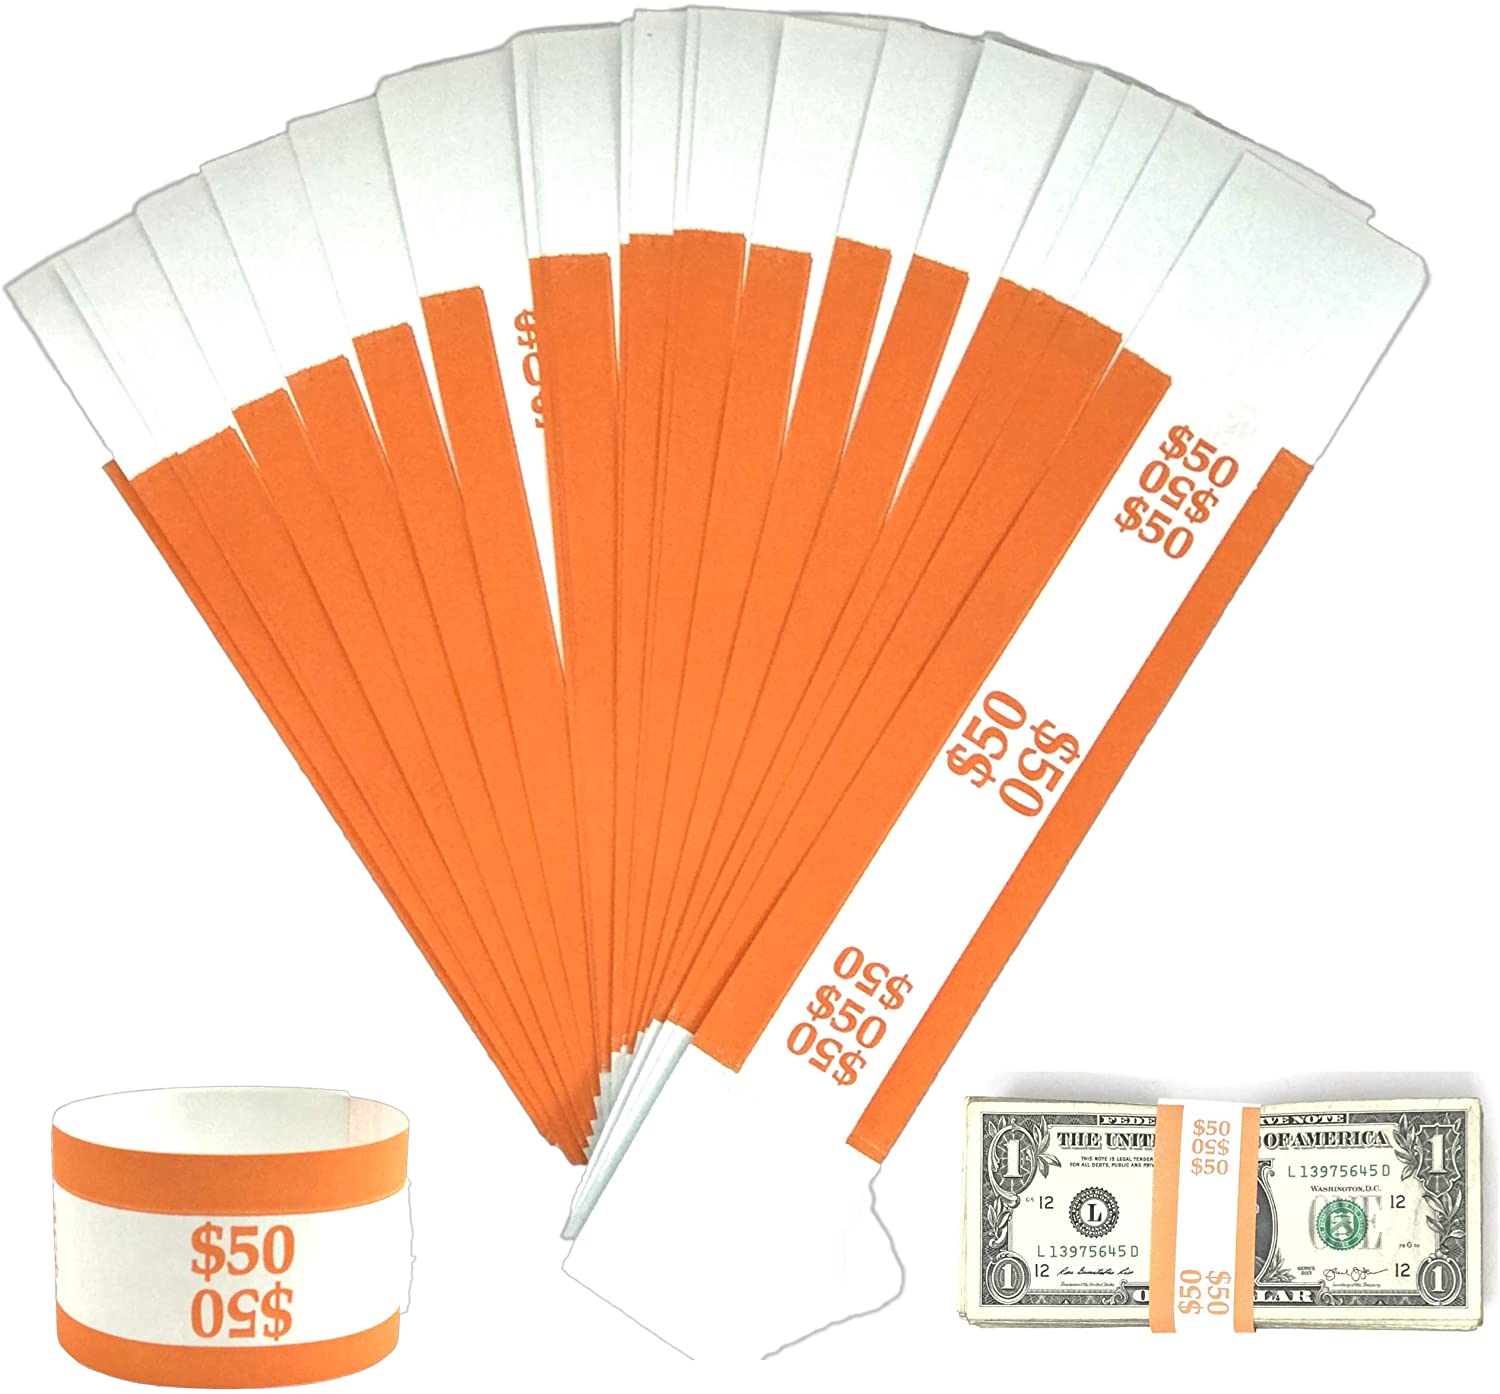 $50 Currency Band 400050 1000 Count Orange The Coin-Tainer Co Four Pack 